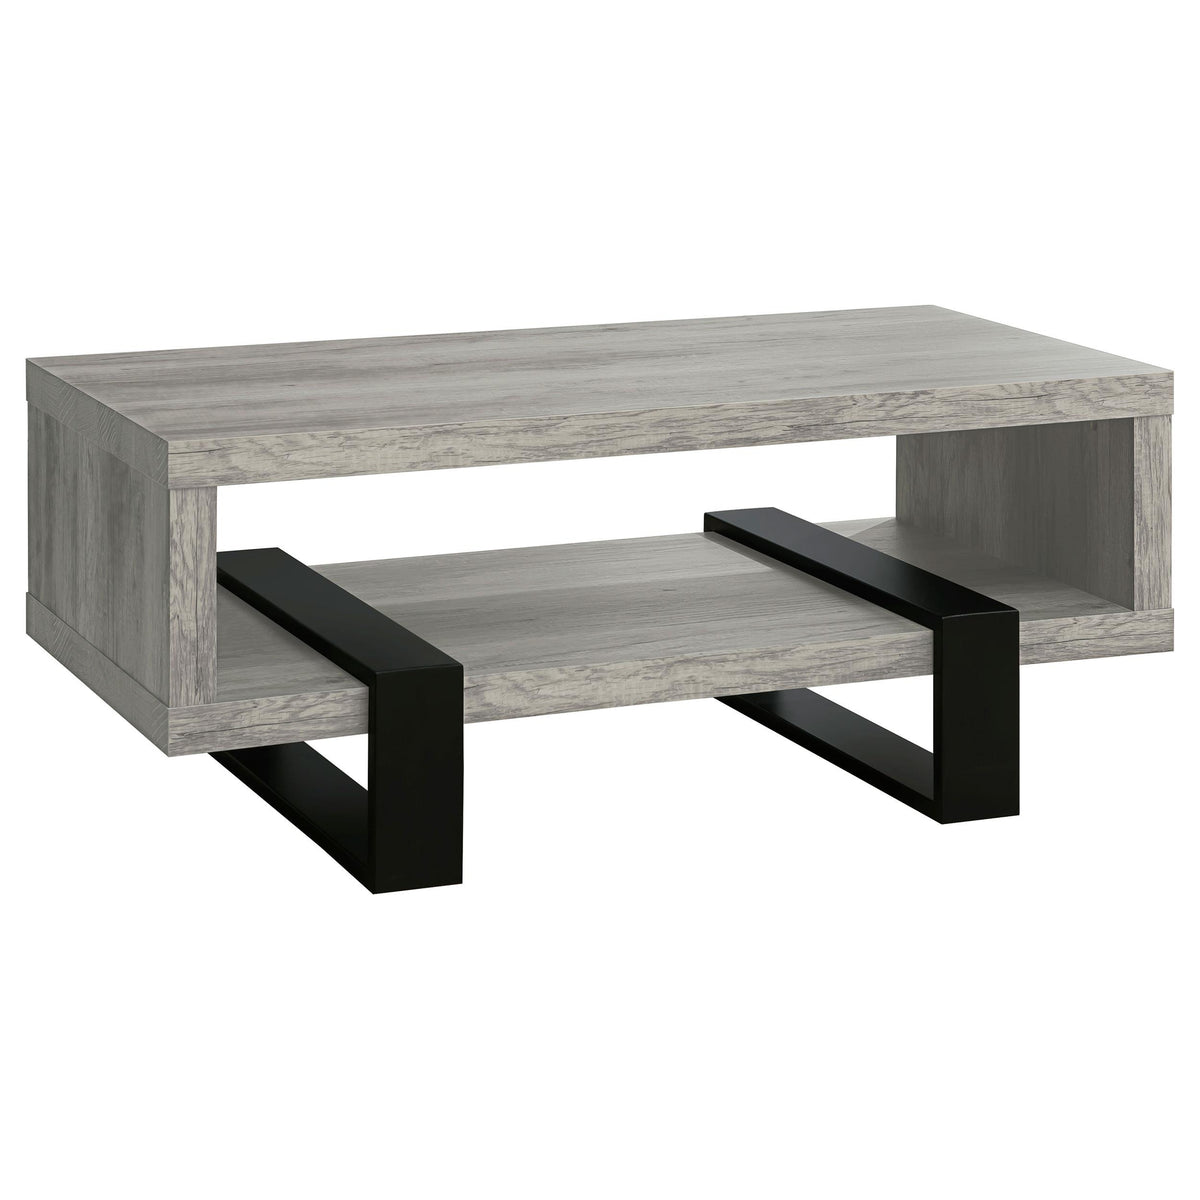 Dinard Coffee Table with Shelf Grey Driftwood  Las Vegas Furniture Stores